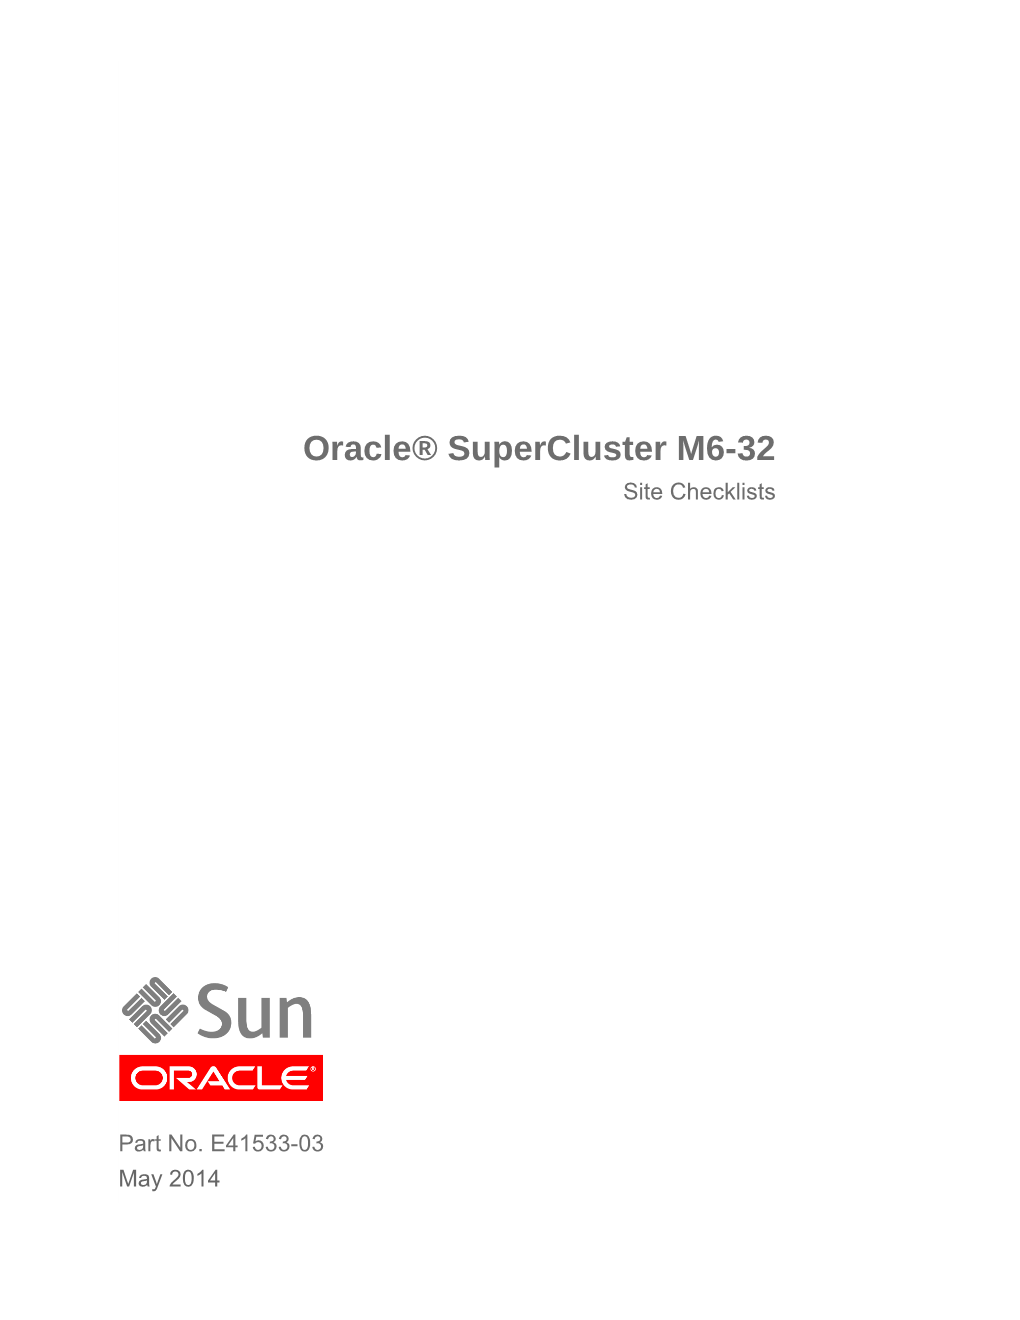 SPARC Supercluster T4-4 Configuration Worksheets and Site Checklists